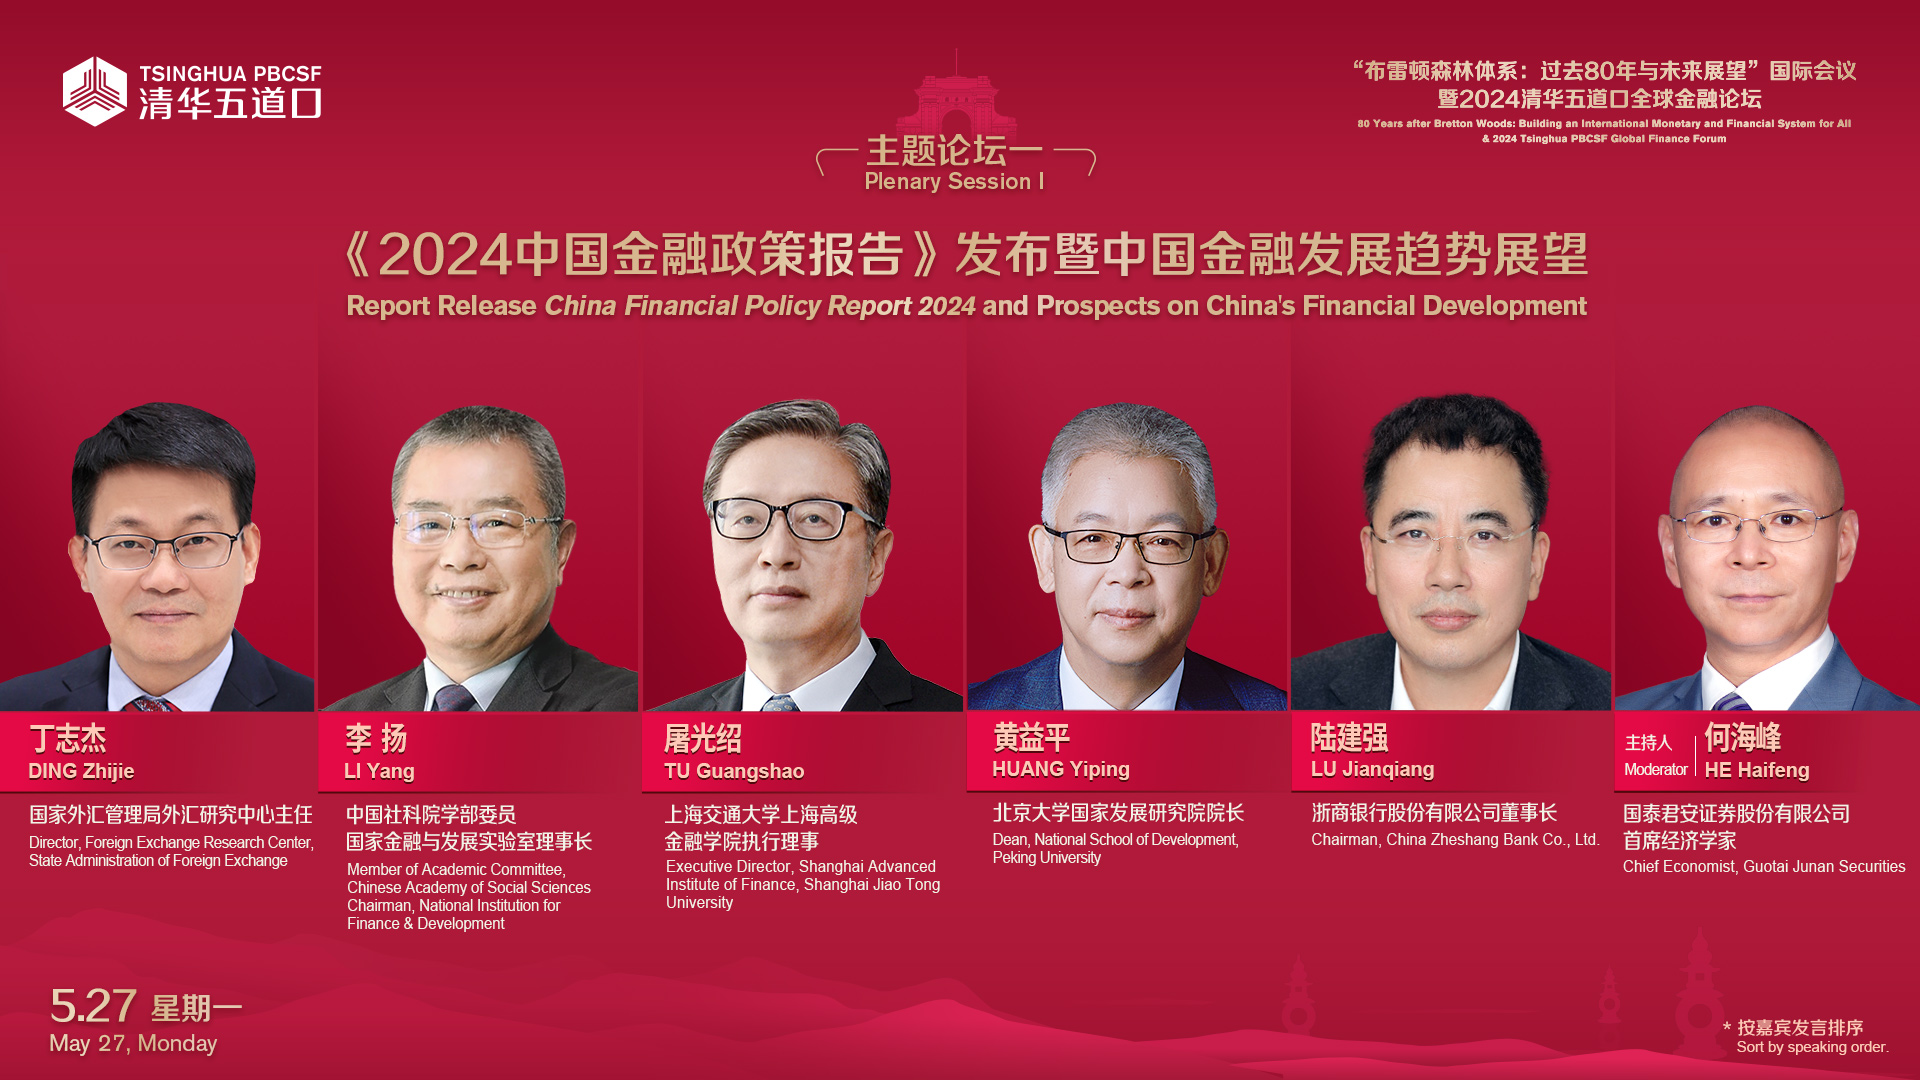 Live: China's Financial Development Outlook – Release of the 2024 China Financial Policy Report